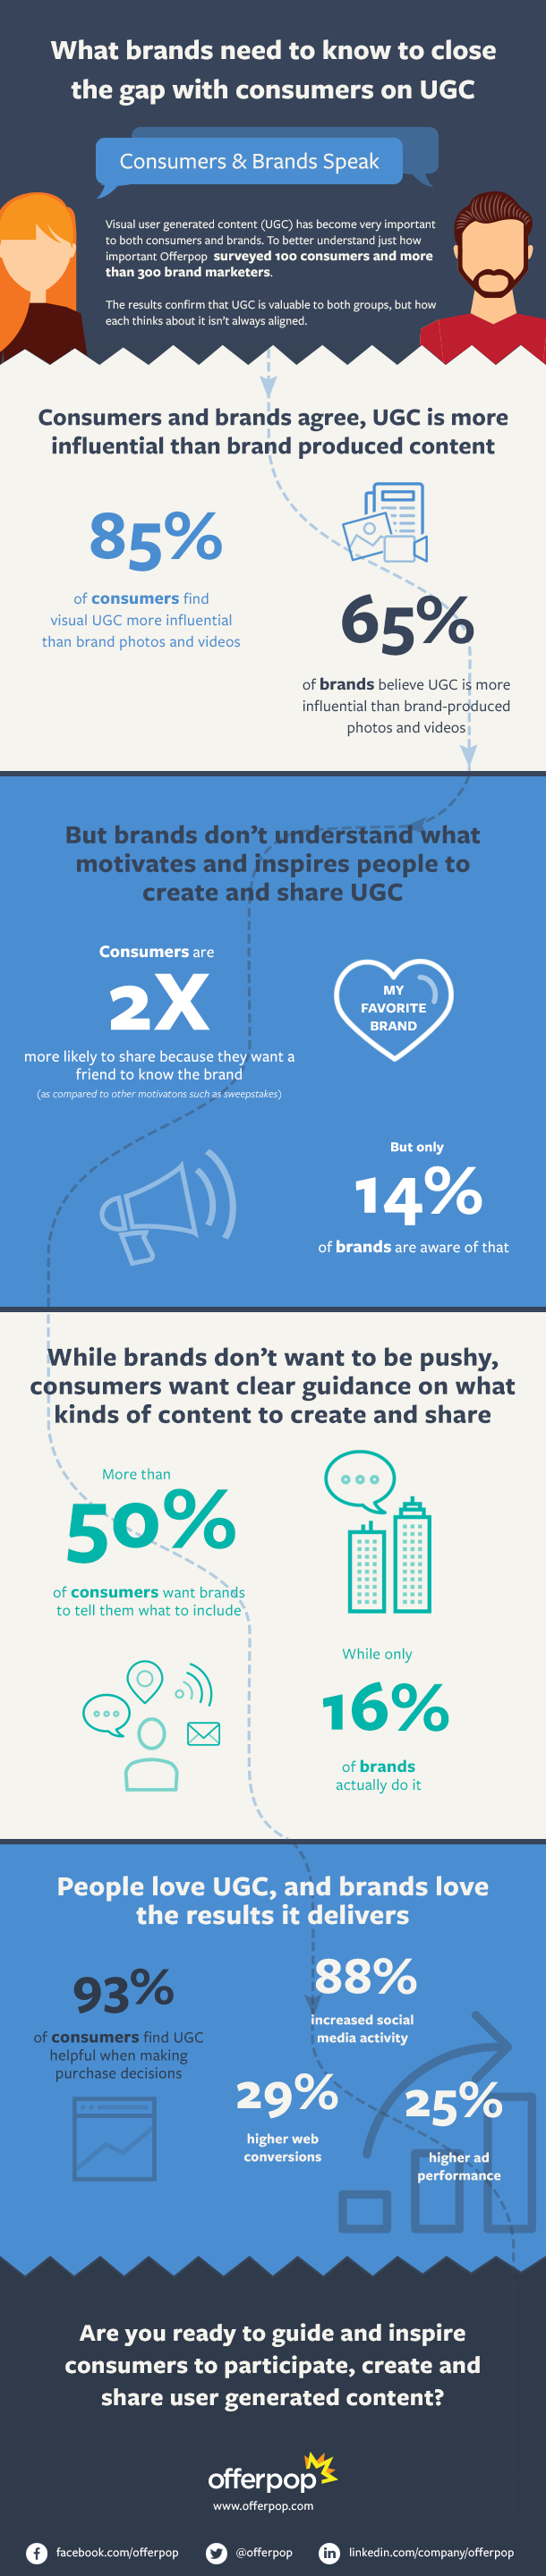 What brands need to know to close the gap with consumers on UGC - infographic